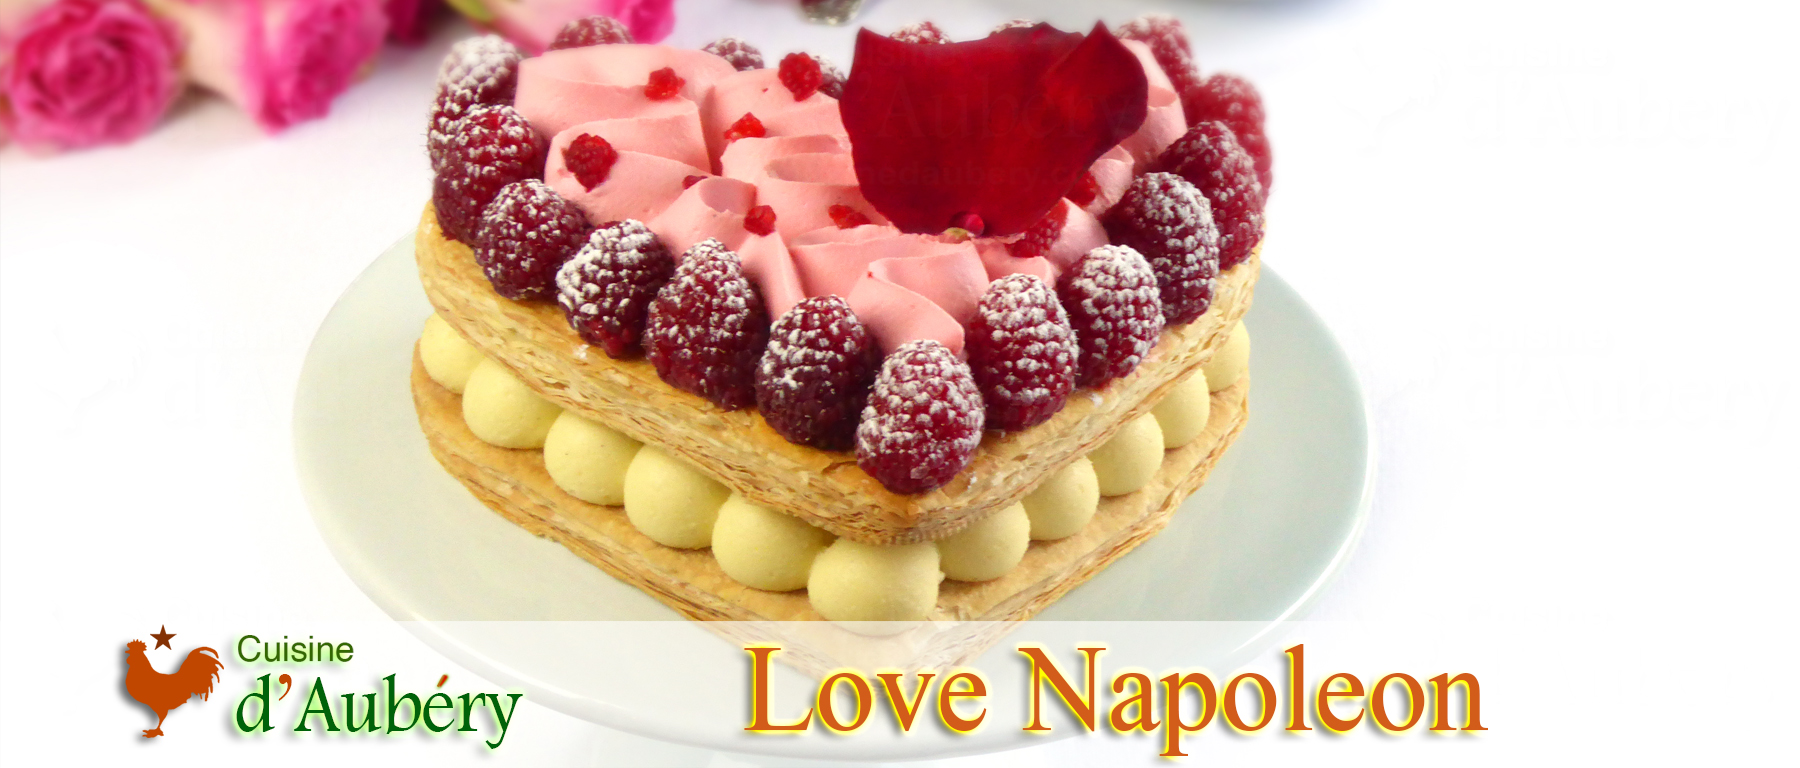 The Love Napoleon Cake (millefeuille), by Stéphane Glacier